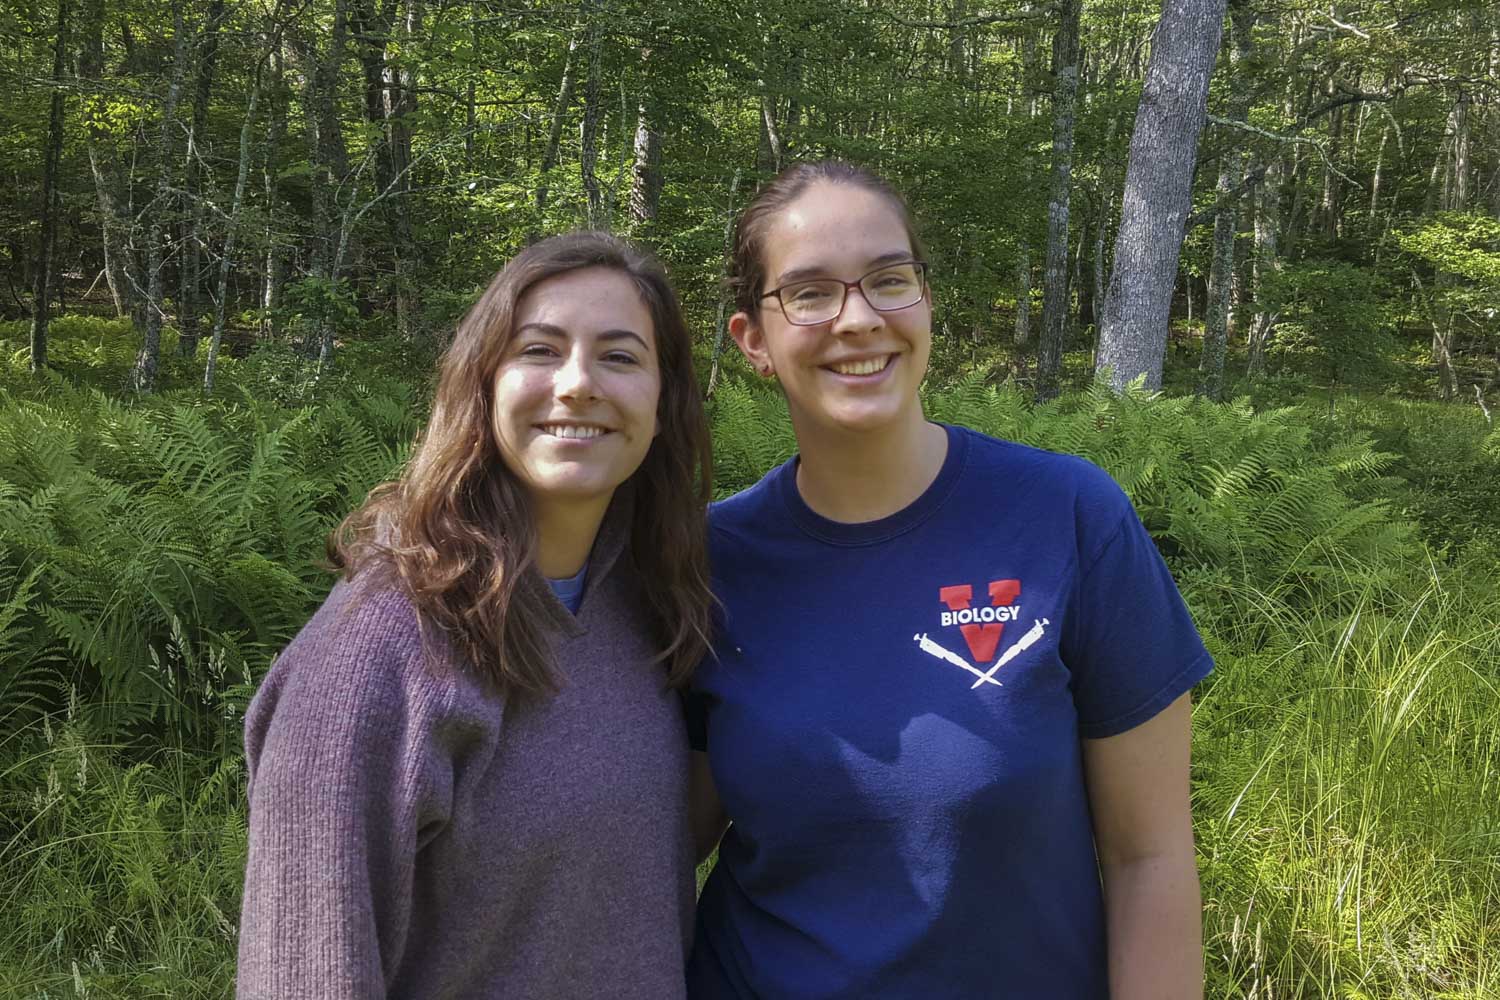 UVA biology students Rachel Thoms, left, and Rita Hueston are in the REU program at Mt. Lake. (Contributed photo)